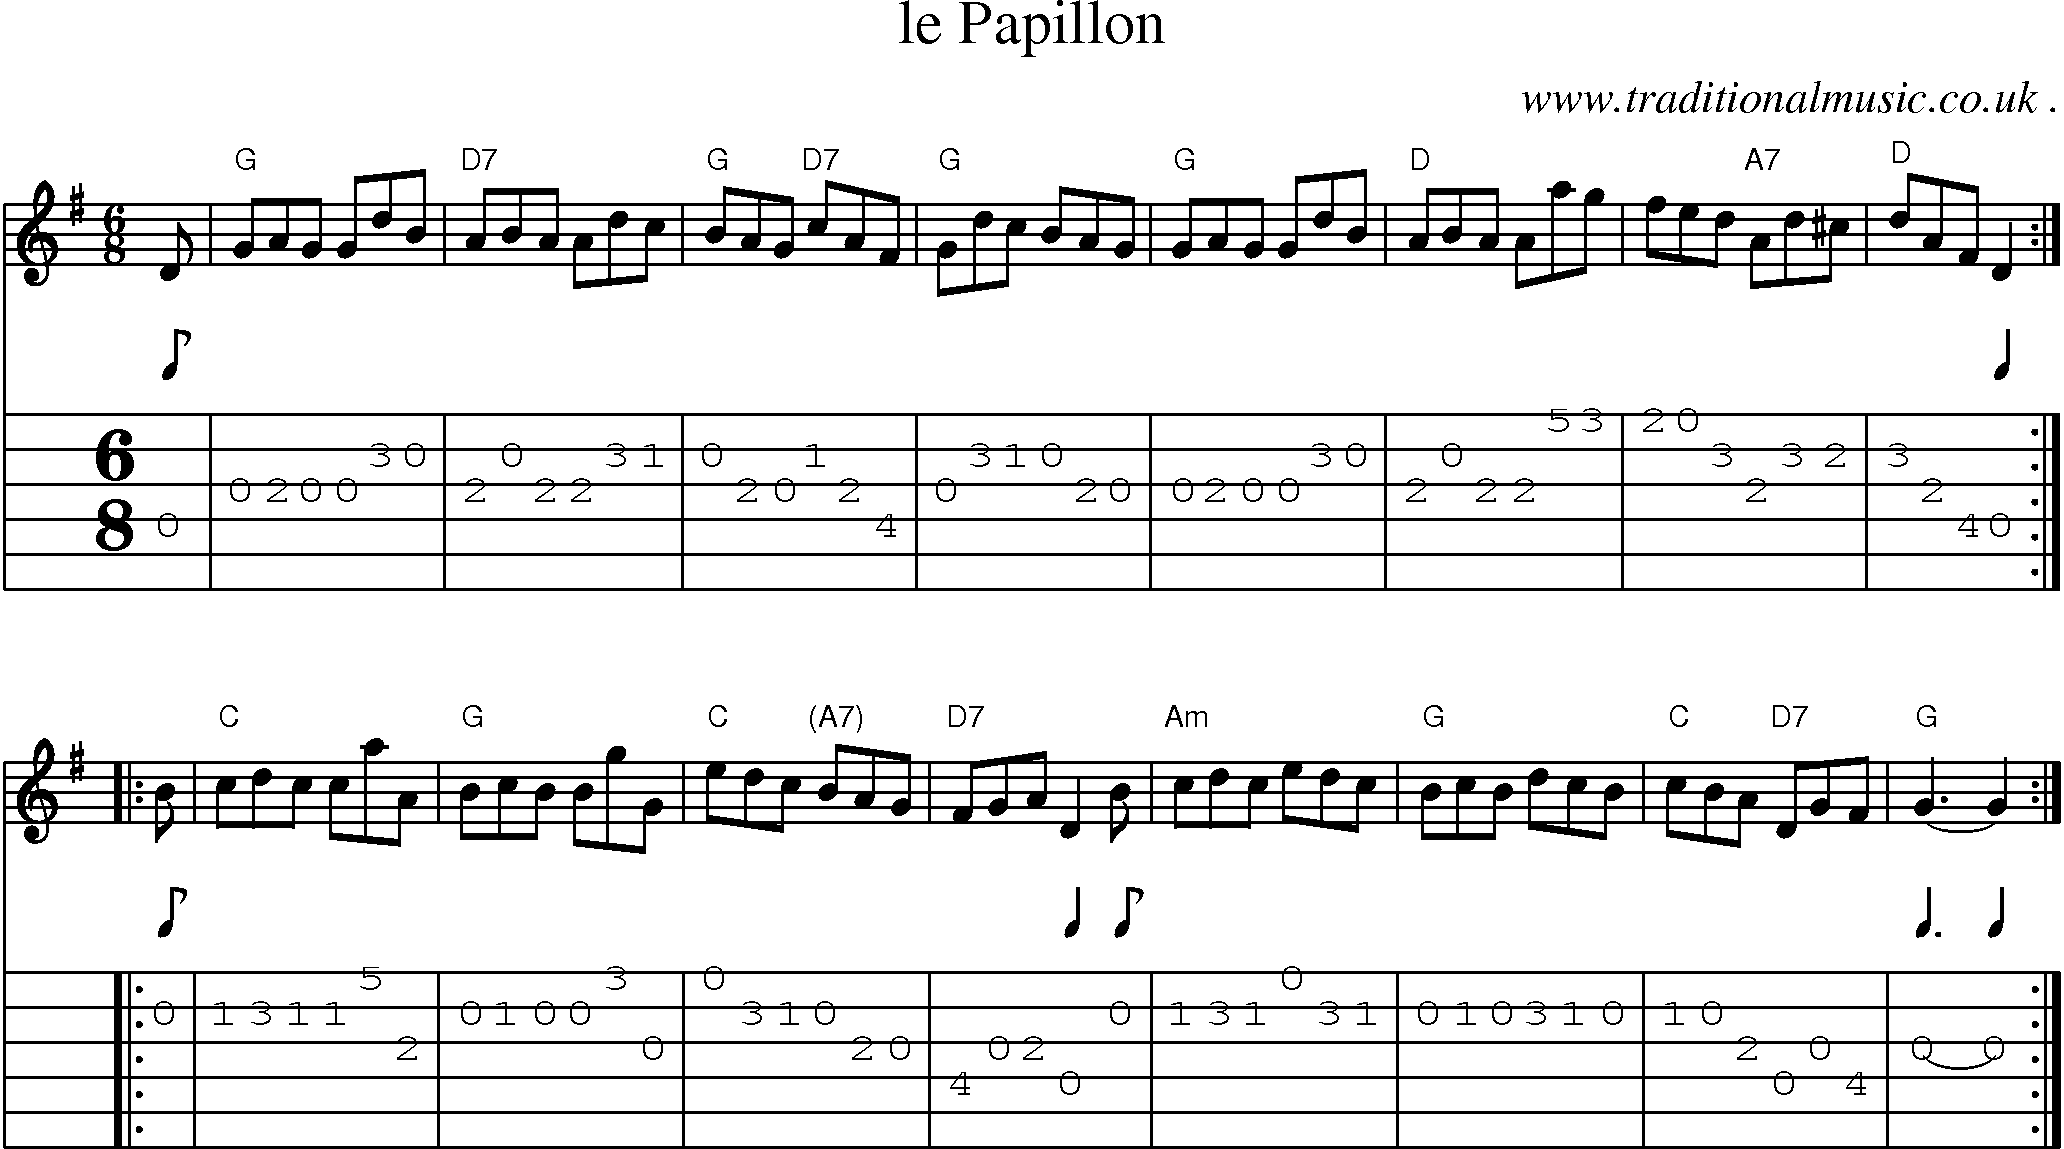 Sheet-music  score, Chords and Guitar Tabs for Le Papillon